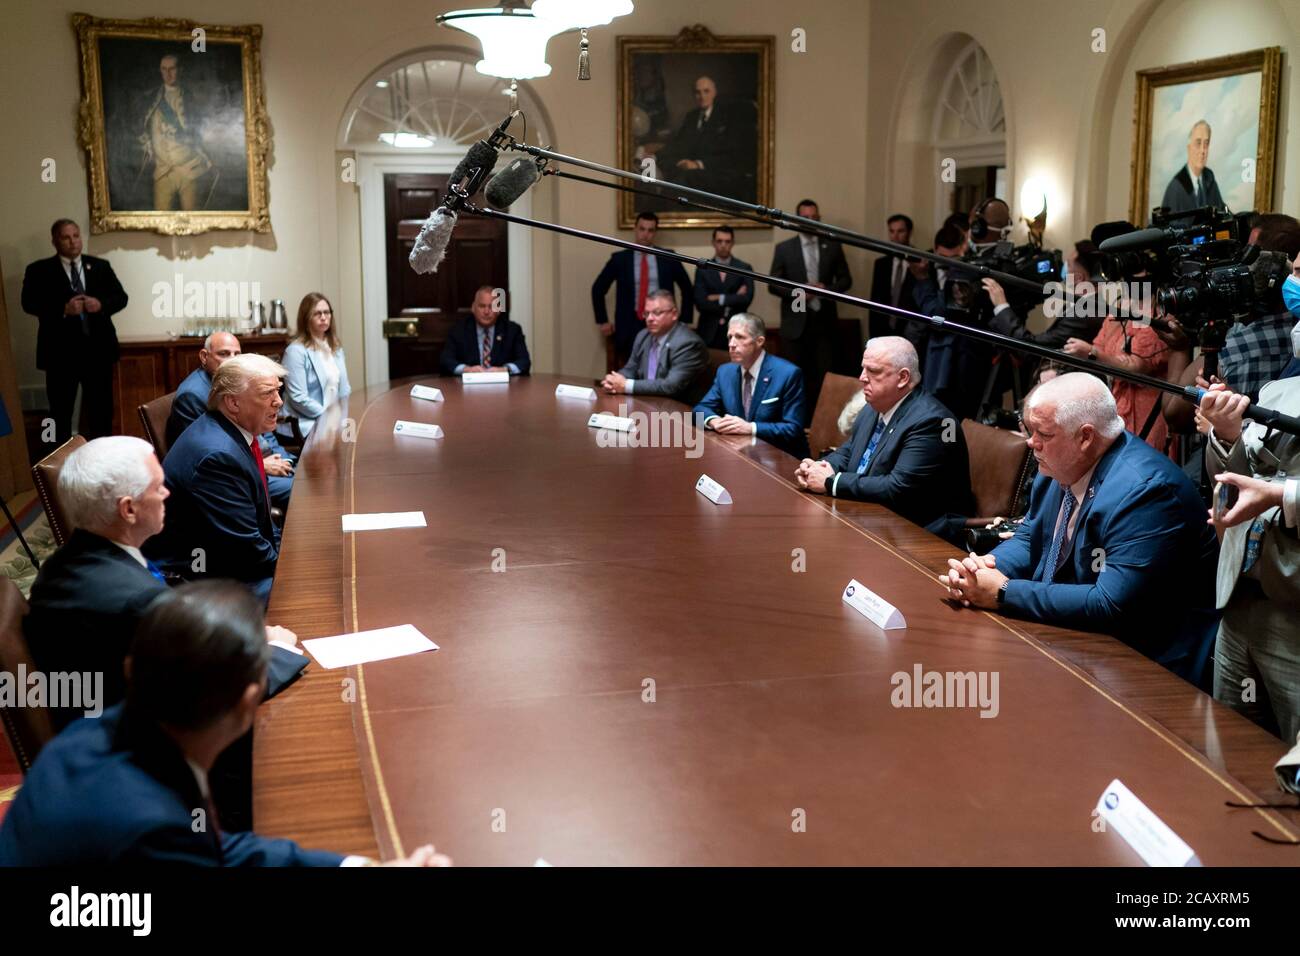 U.S. President Donald Trump and Vice President Mike Pence during a meeting with the leadership of the National Association of Police Organizations in the Cabinet Room of the White House July 31, 2020 in Washington, DC. Stock Photo